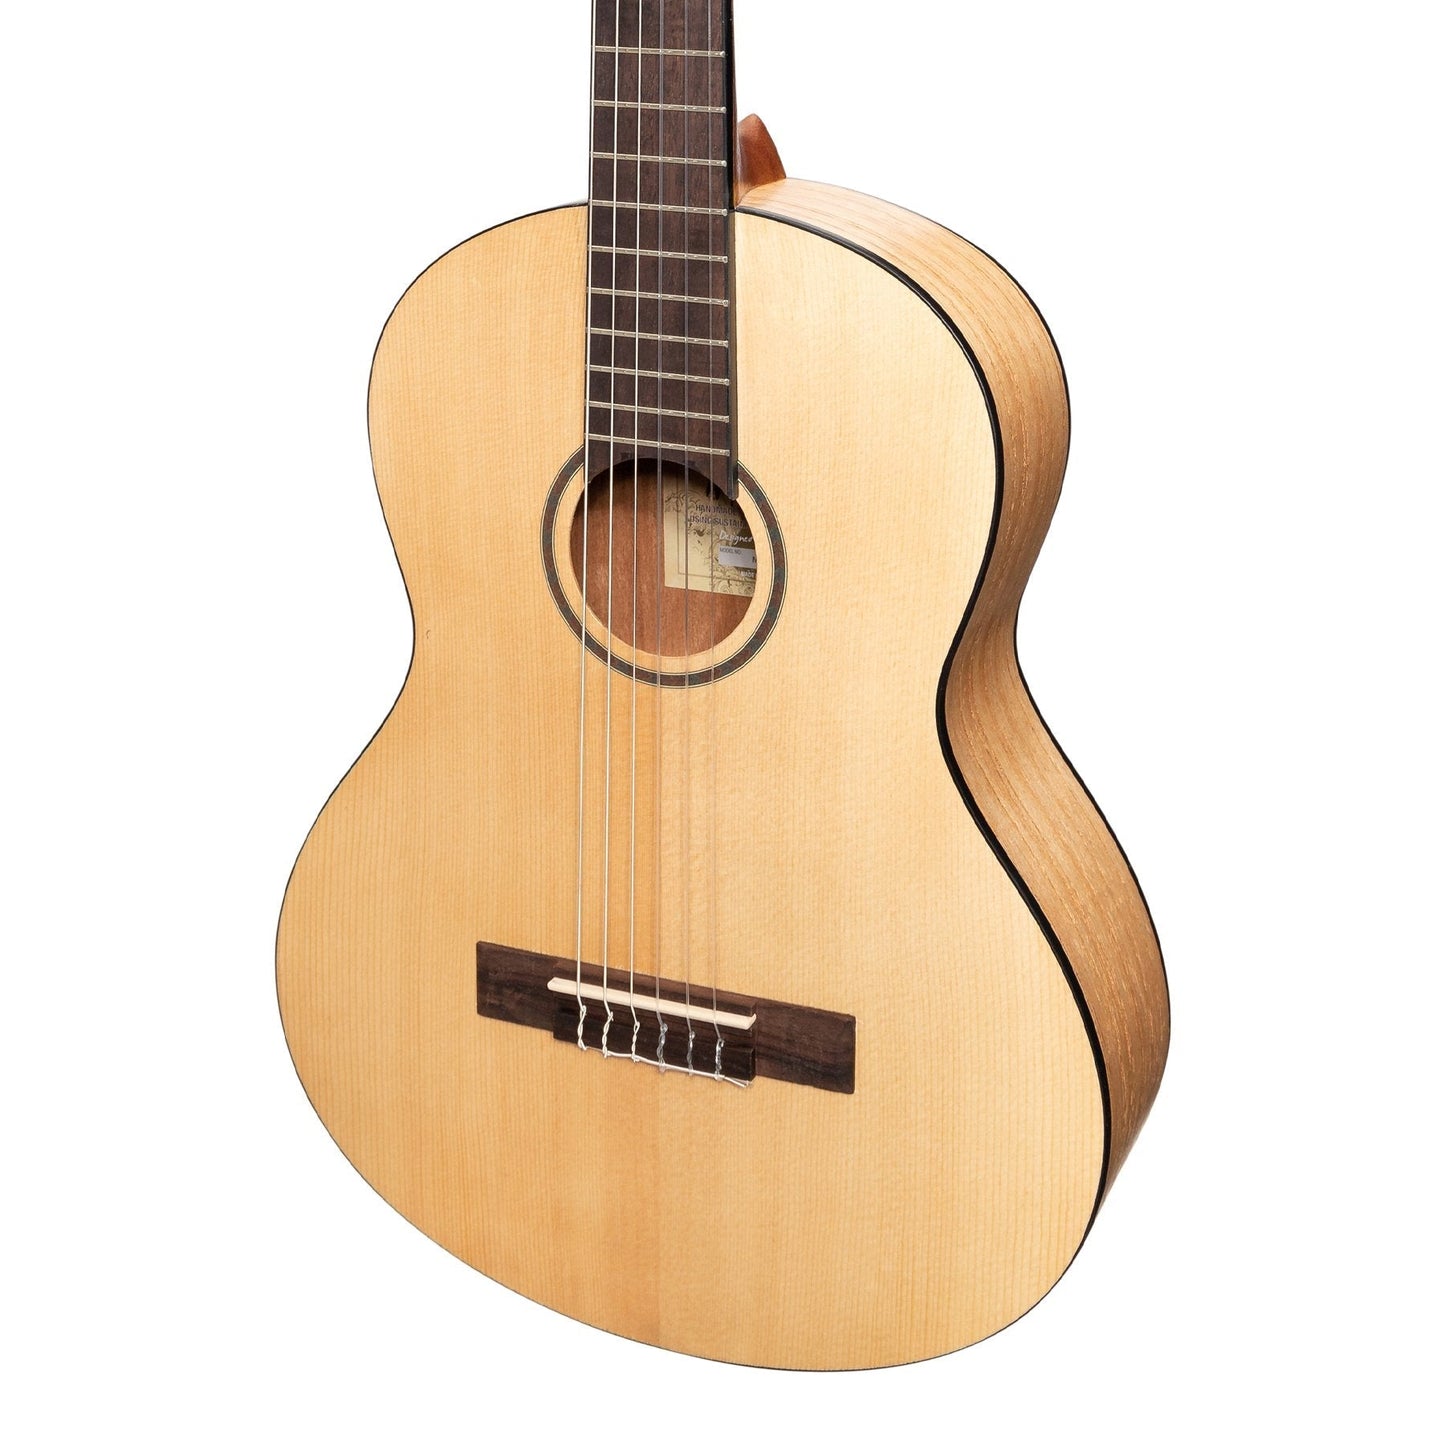 Martinez 'Slim Jim' 3/4 Size Student Classical Guitar with Built In Tuner (Spruce/Mahogany)